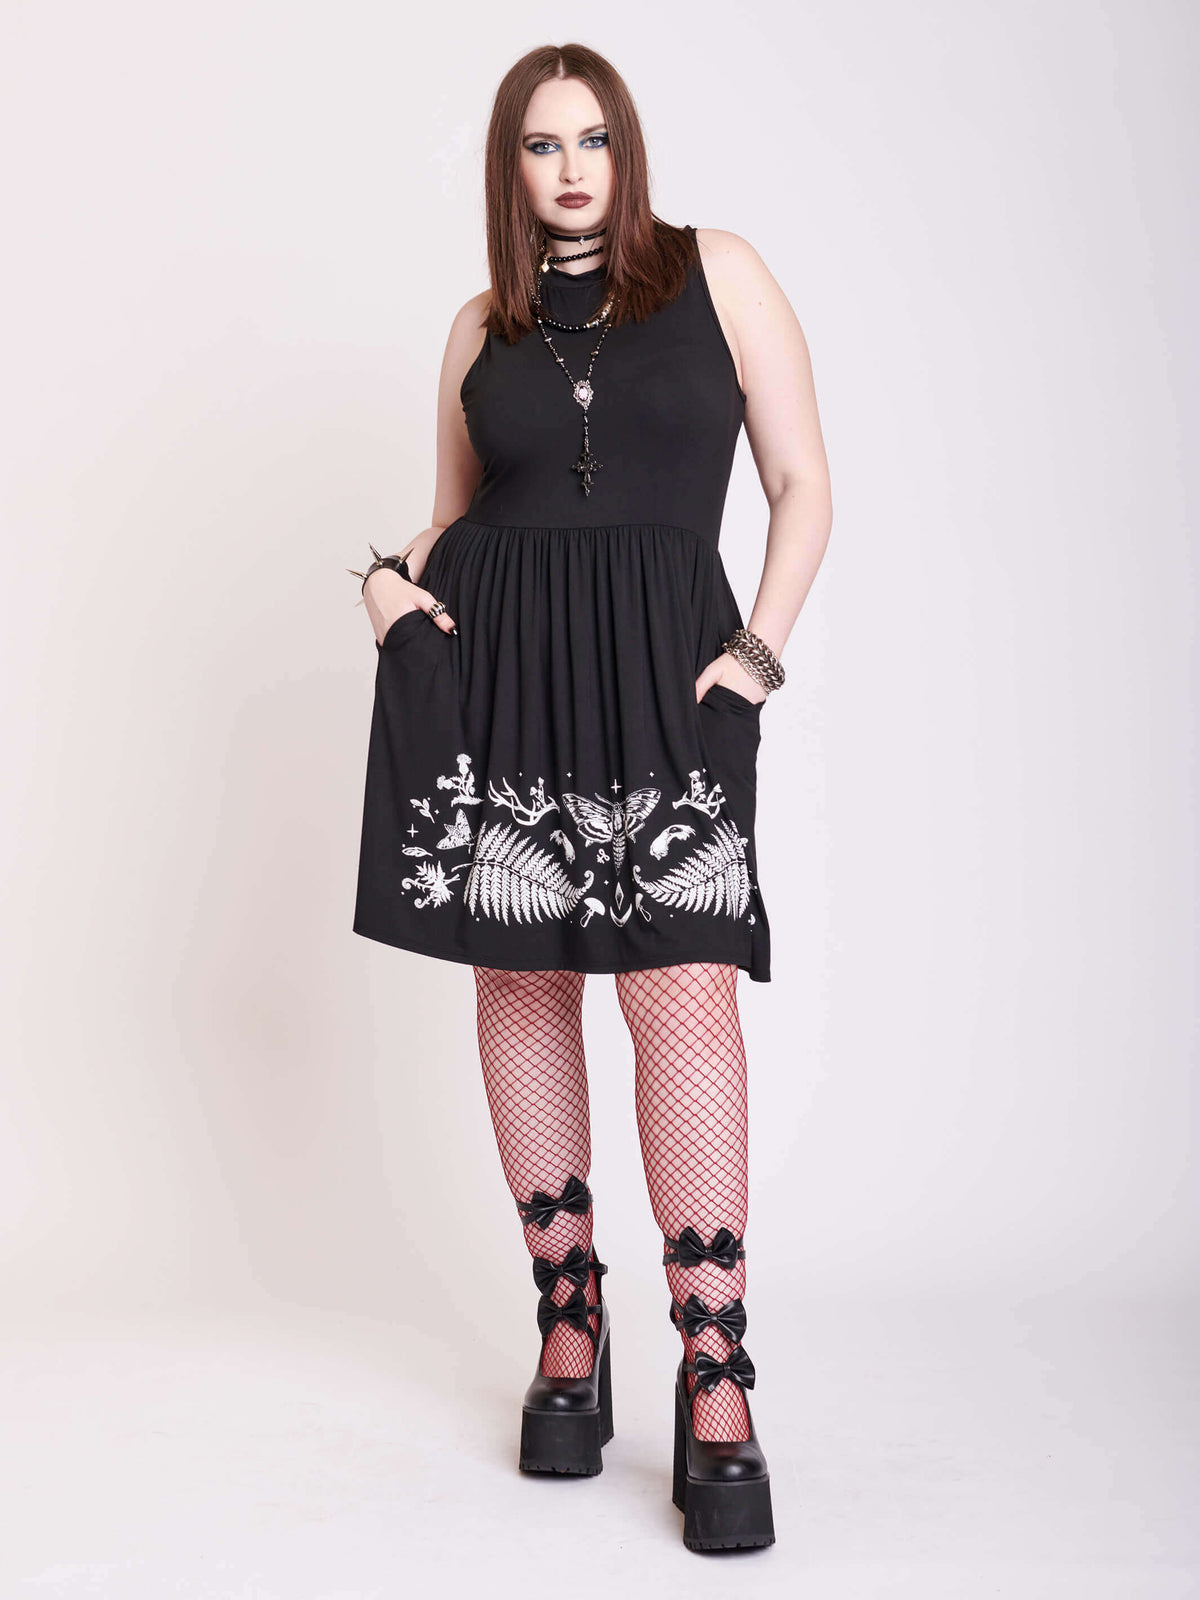 black sleevless dress with forest findings graphics on skirt